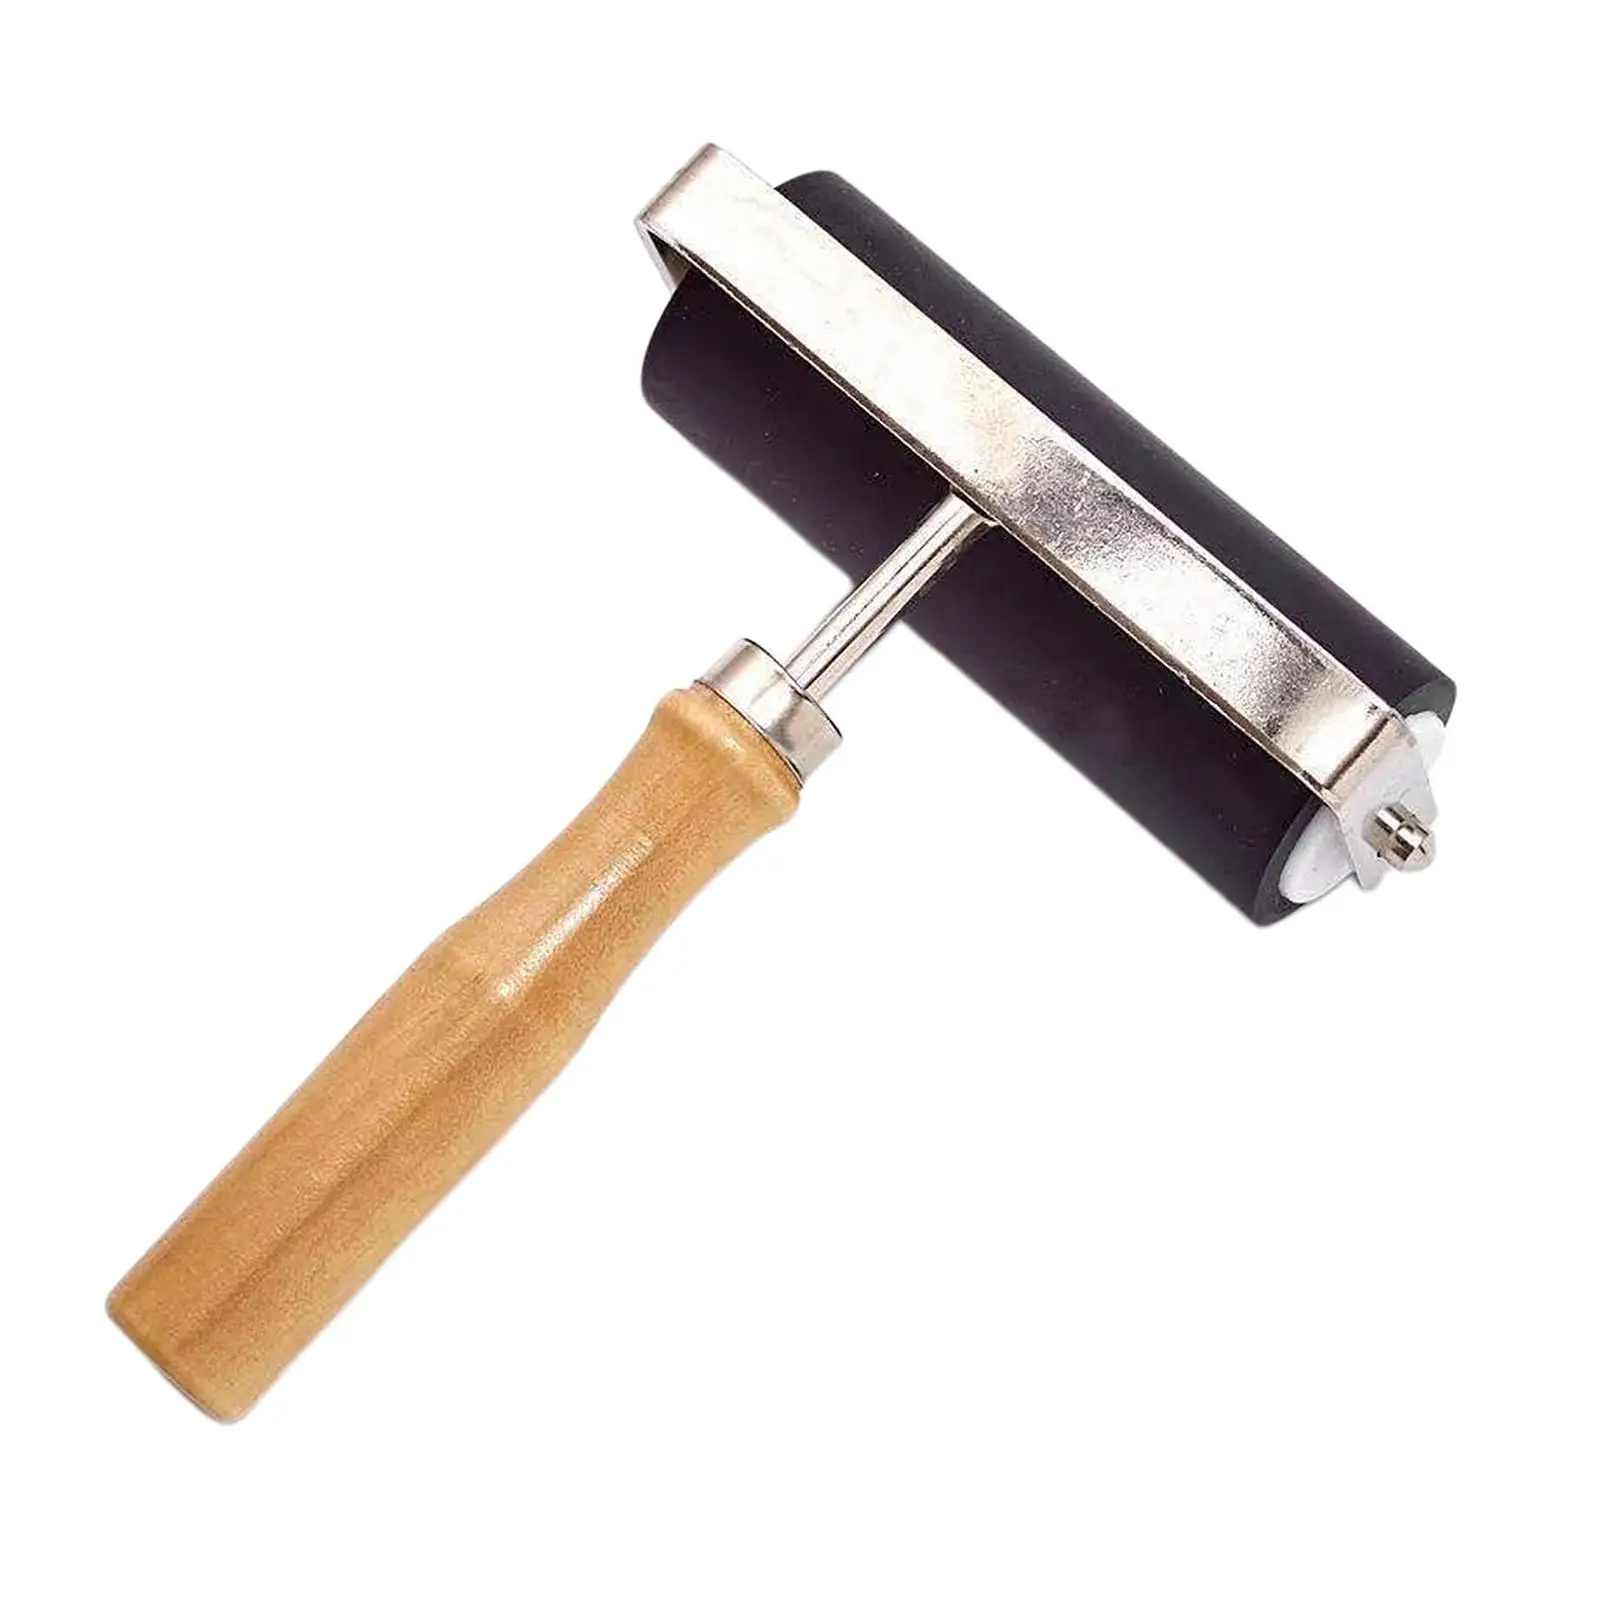 4 Inch Rubber Brayer Roller for Printmaking, Printing, Oil Painting,Stamping